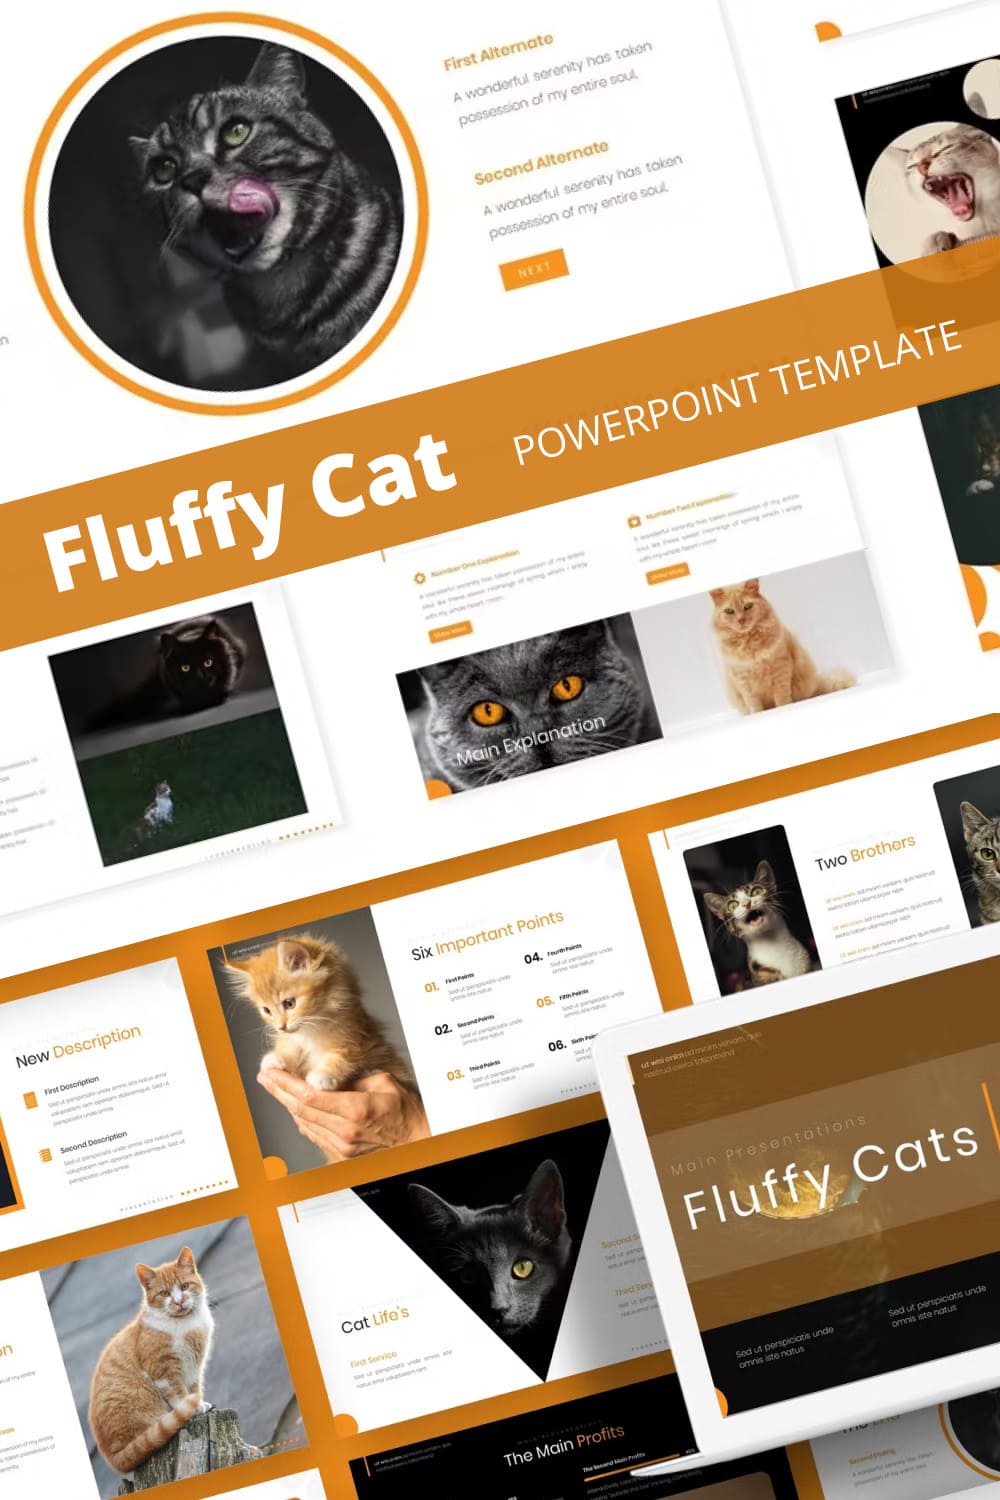 Fluffy cat powerpoint template - pinterest image preview.